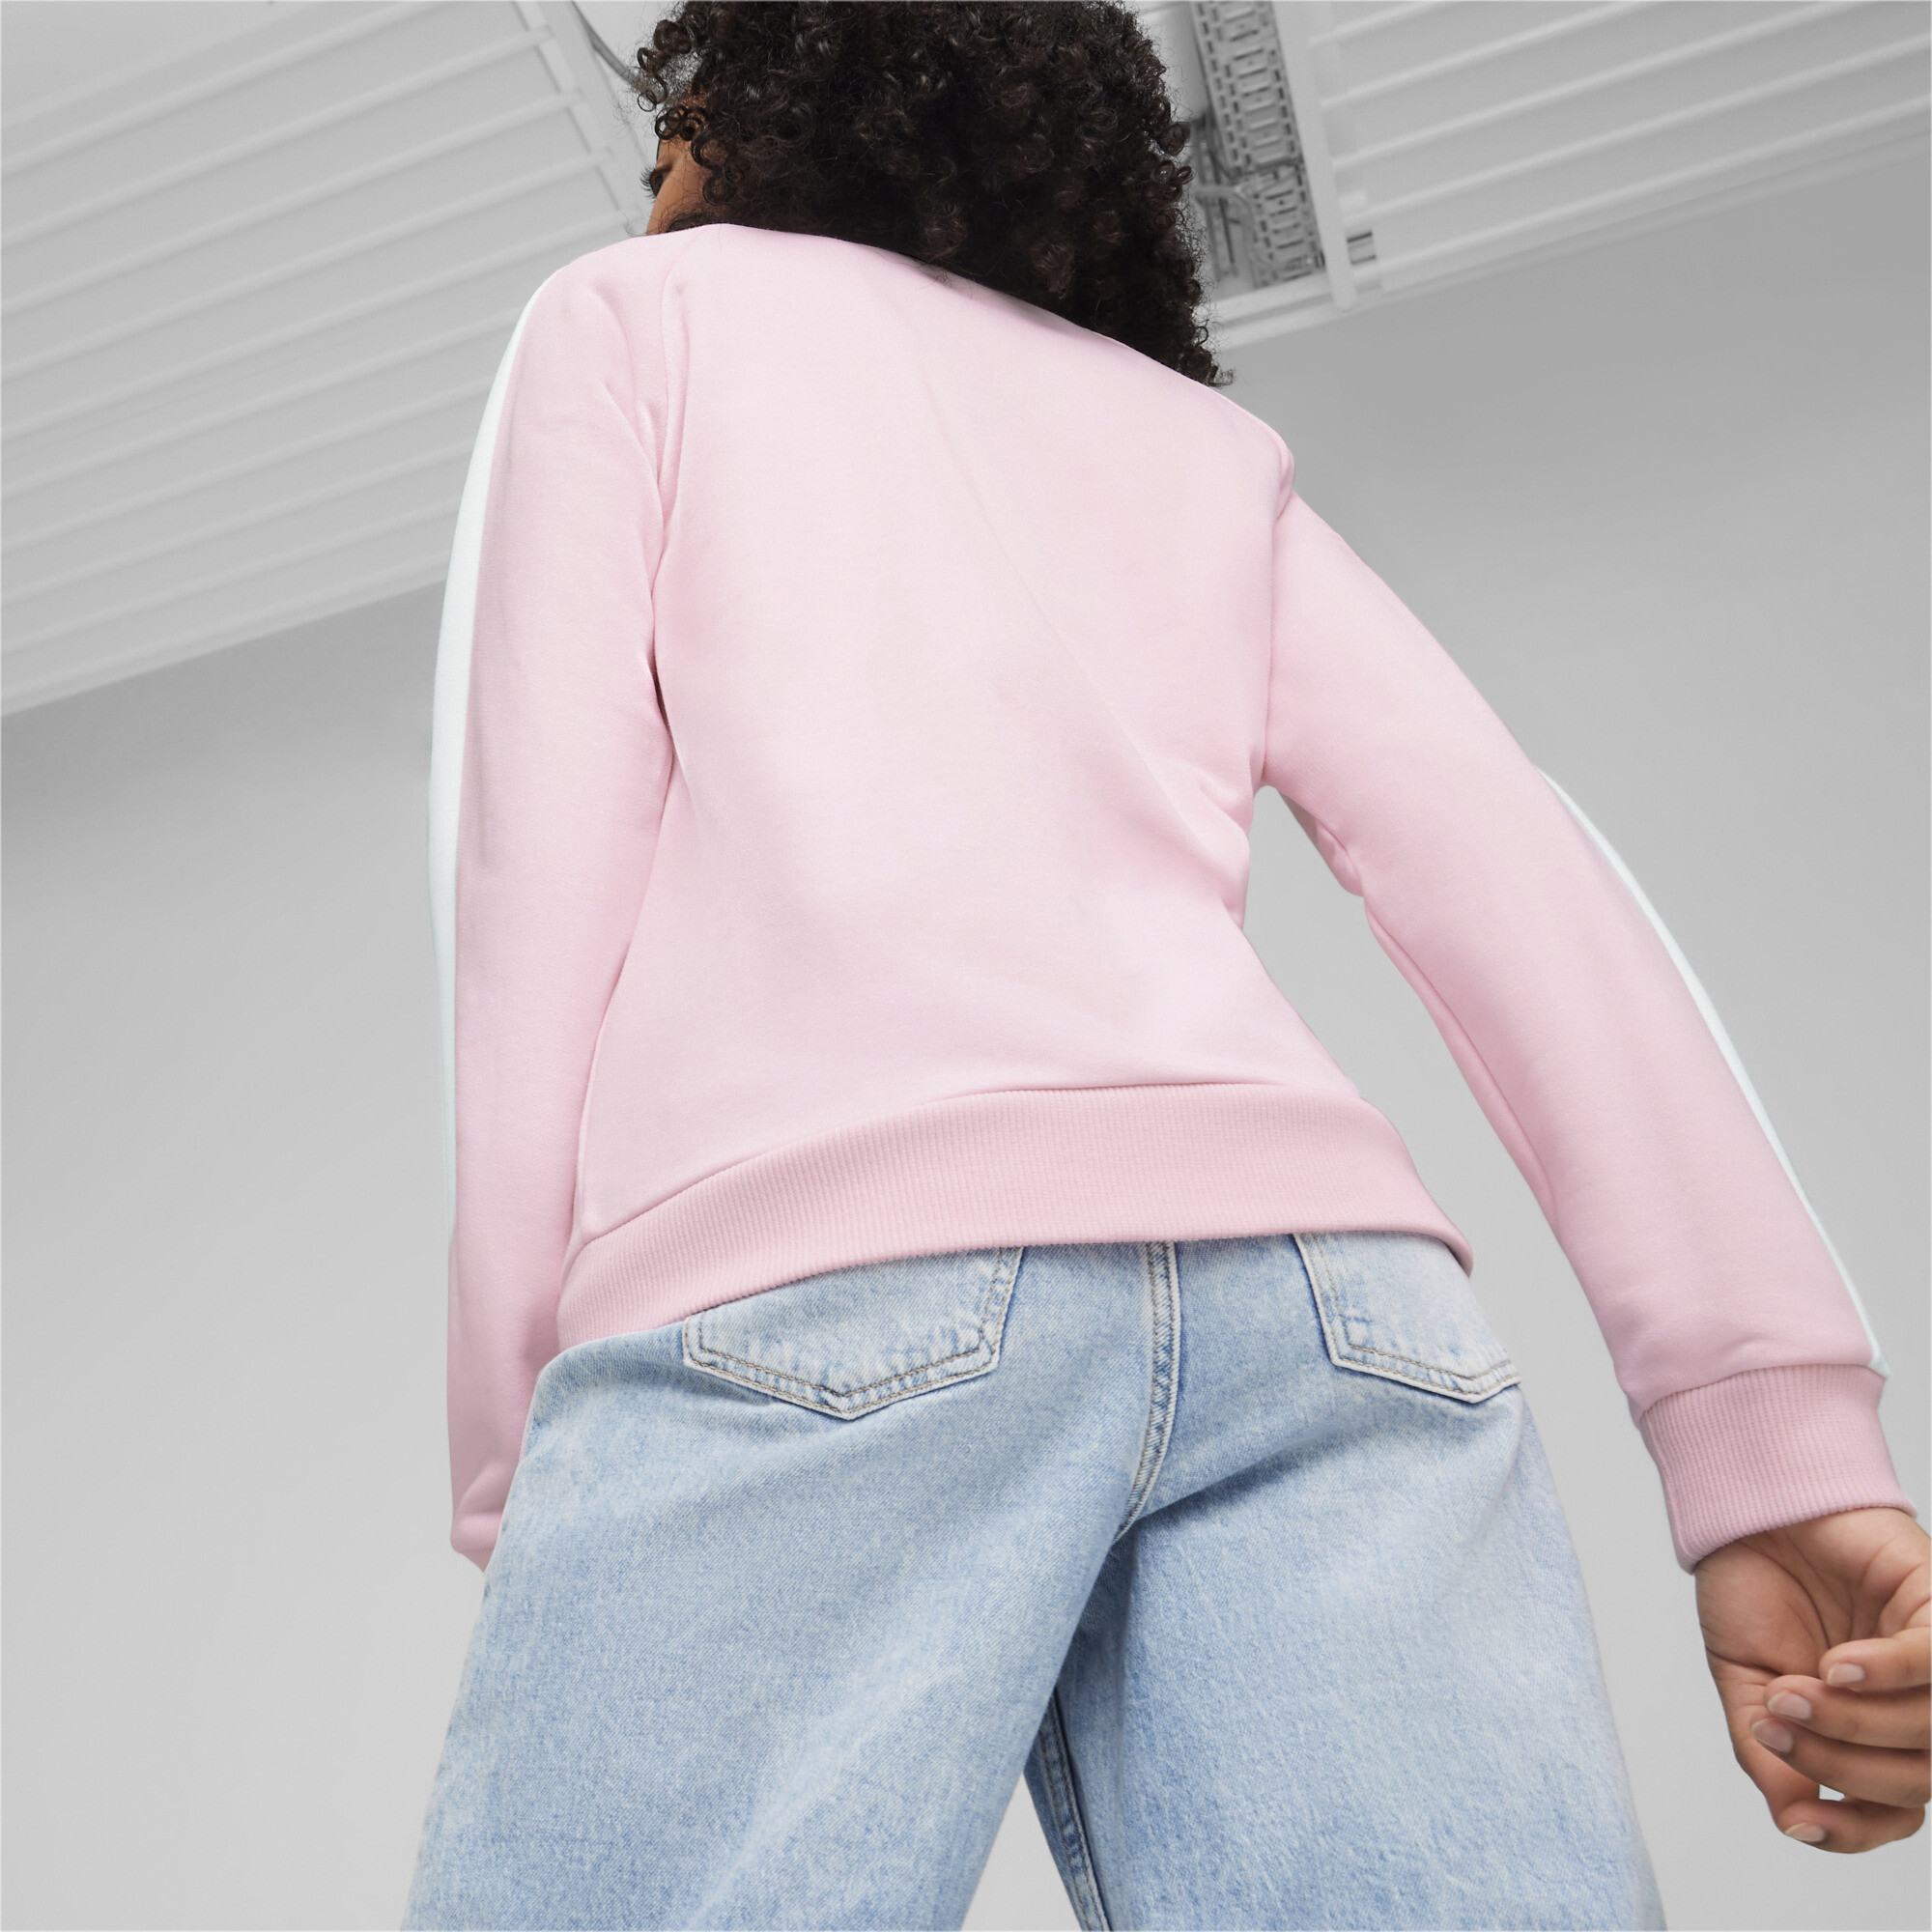 PUMA Classics T7 Track Jacket In Pink, Size 11-12 Youth